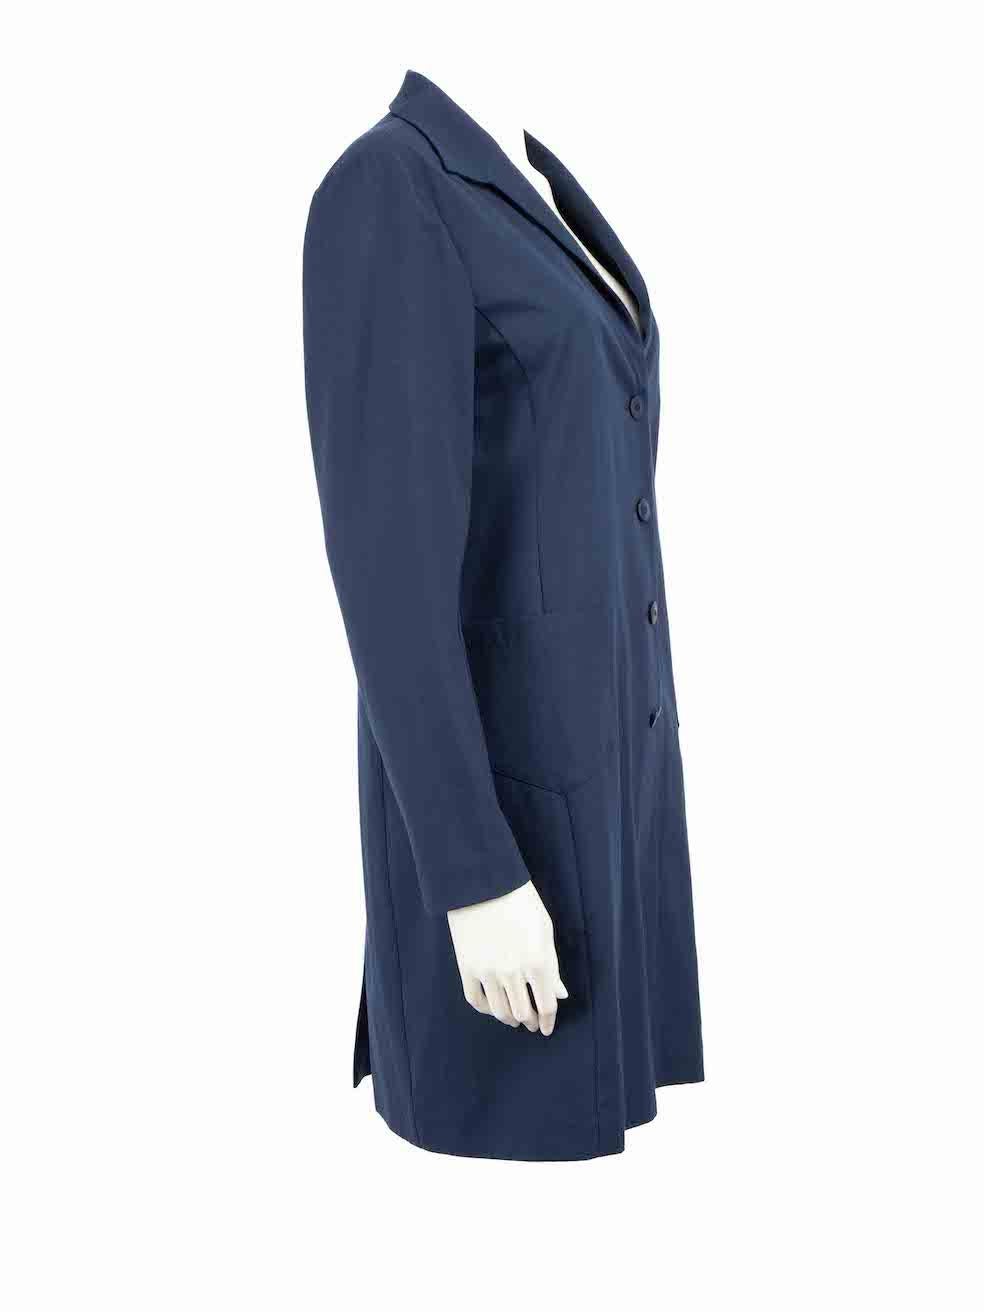 CONDITION is Very good. Minimal wear to coat is evident. Minimal discoloured marks to fabric on sleeves and front of coat on this used Miu Miu designer resale item.

Details
Blue
Polyester
Mid length coat
Single breasted
1x Chest pocket
2x Front